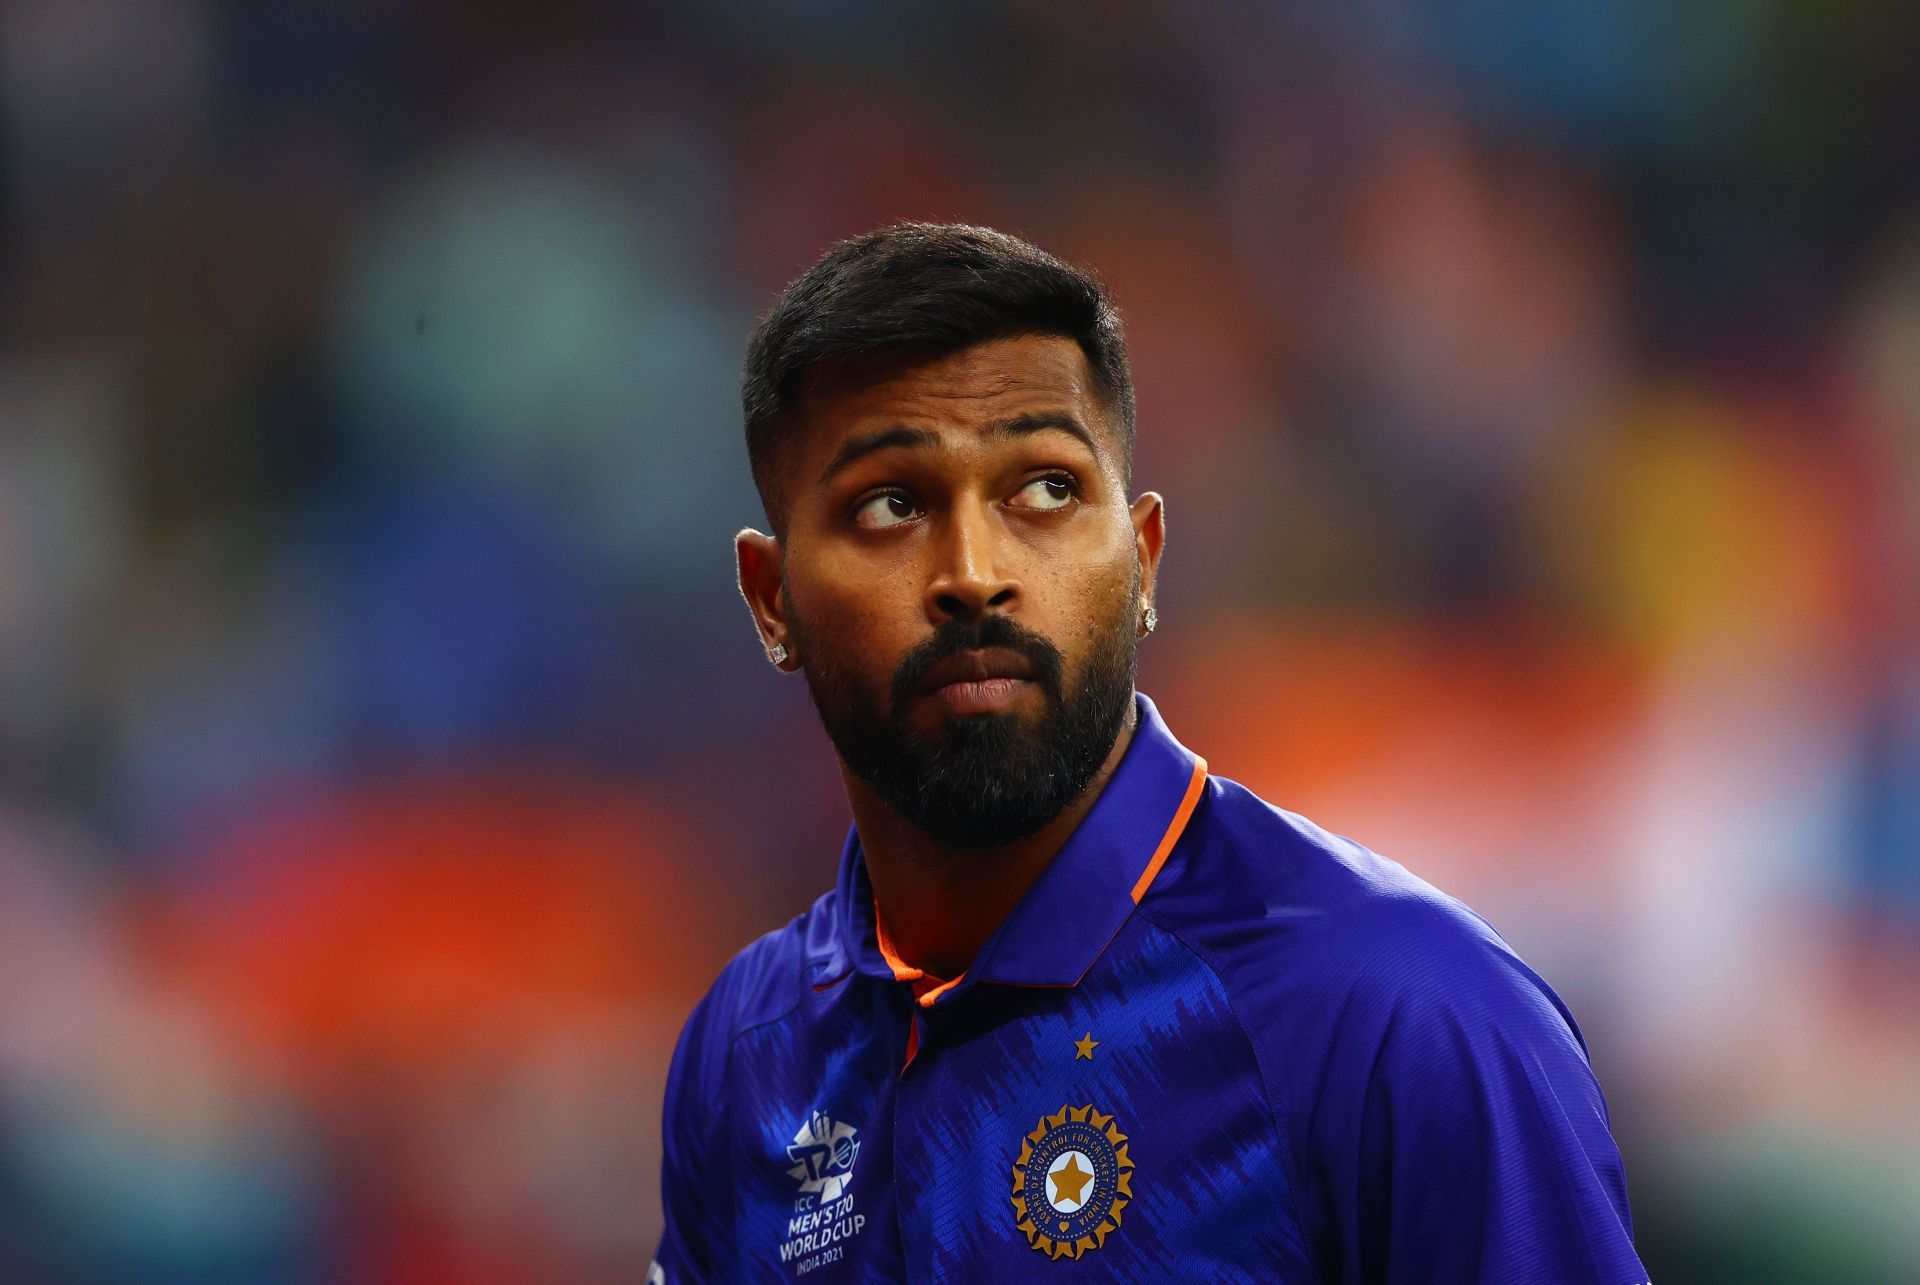 Hardik Pandya has been laid low by fitness issues of late